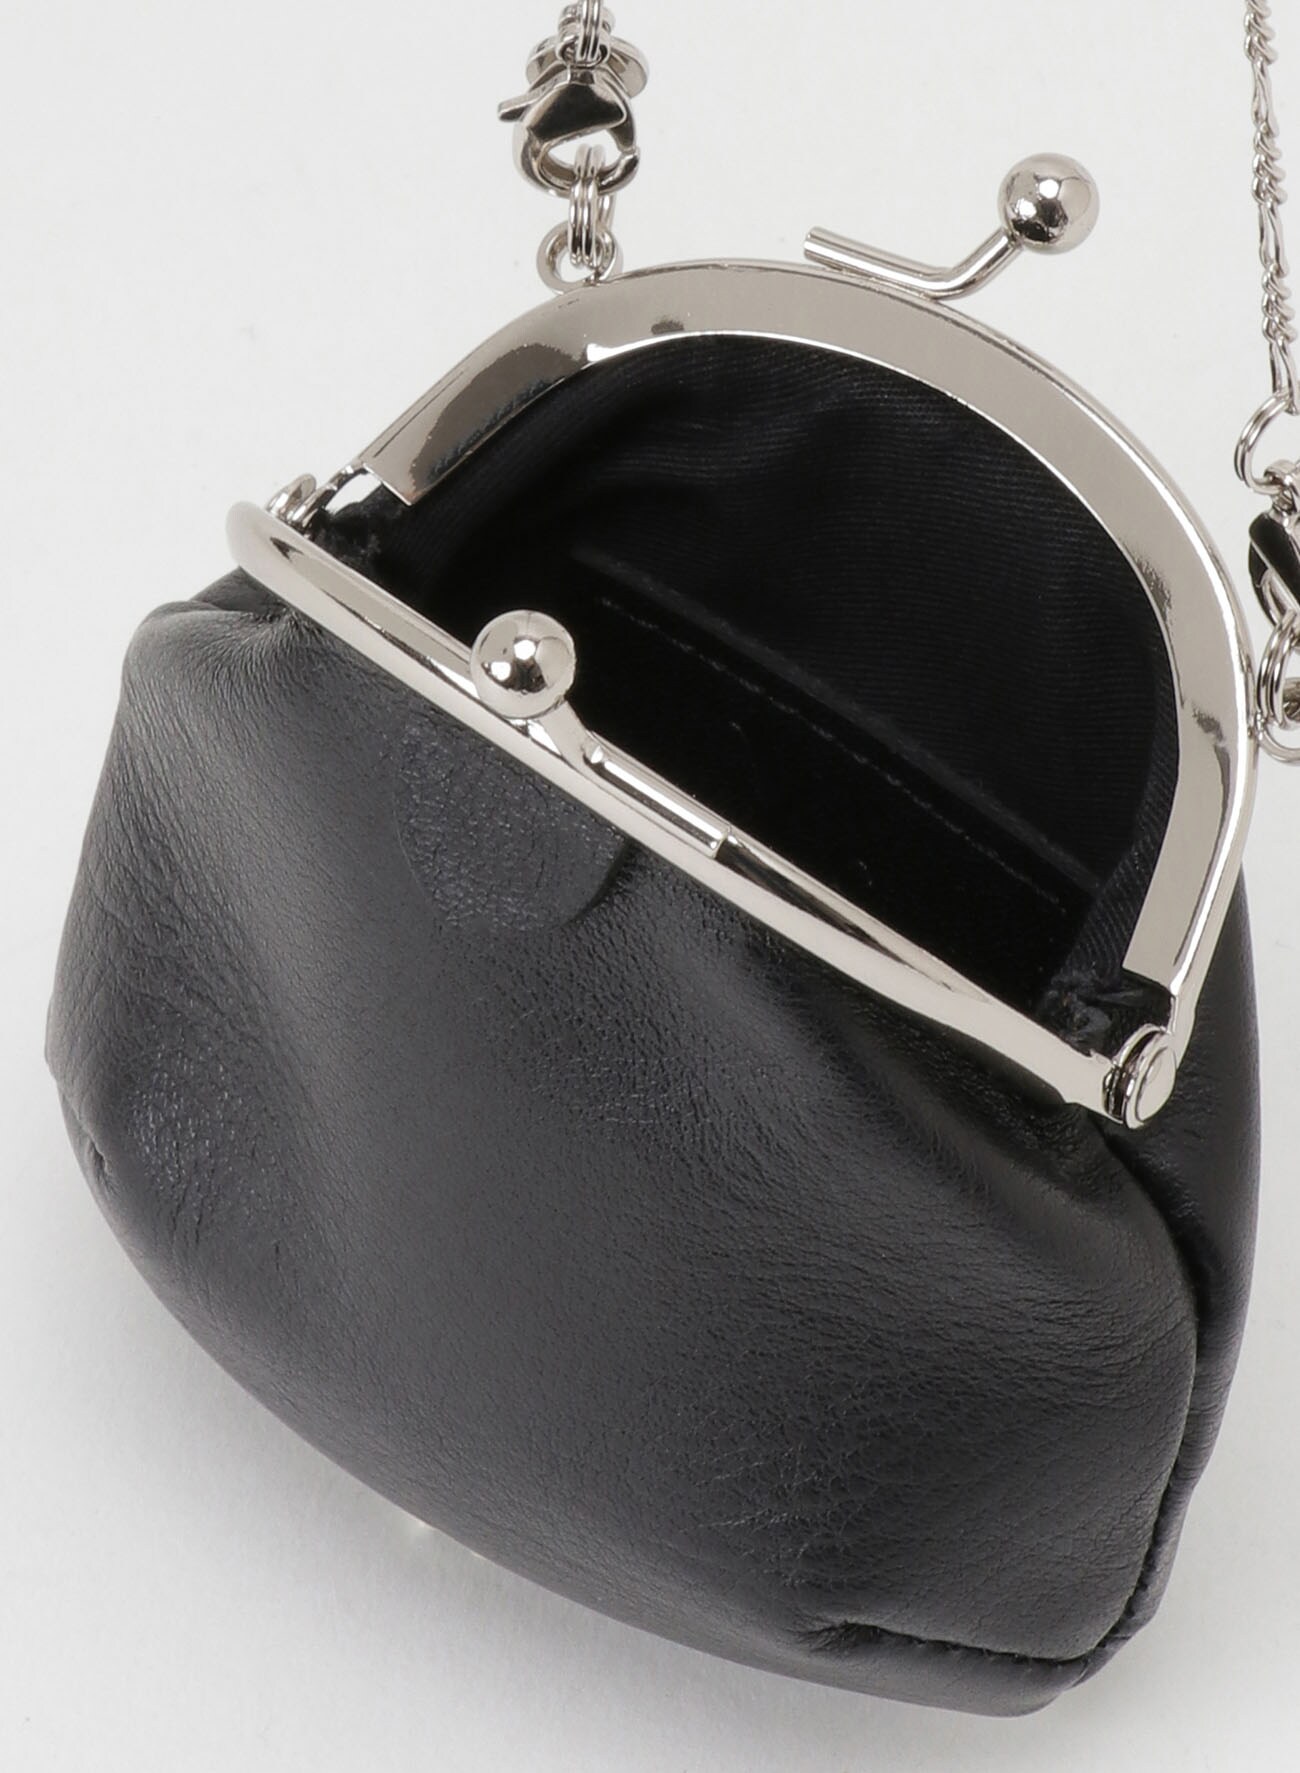 SEMI GLOSS SMOOTH LEATHER NECKLESS COIN CASE